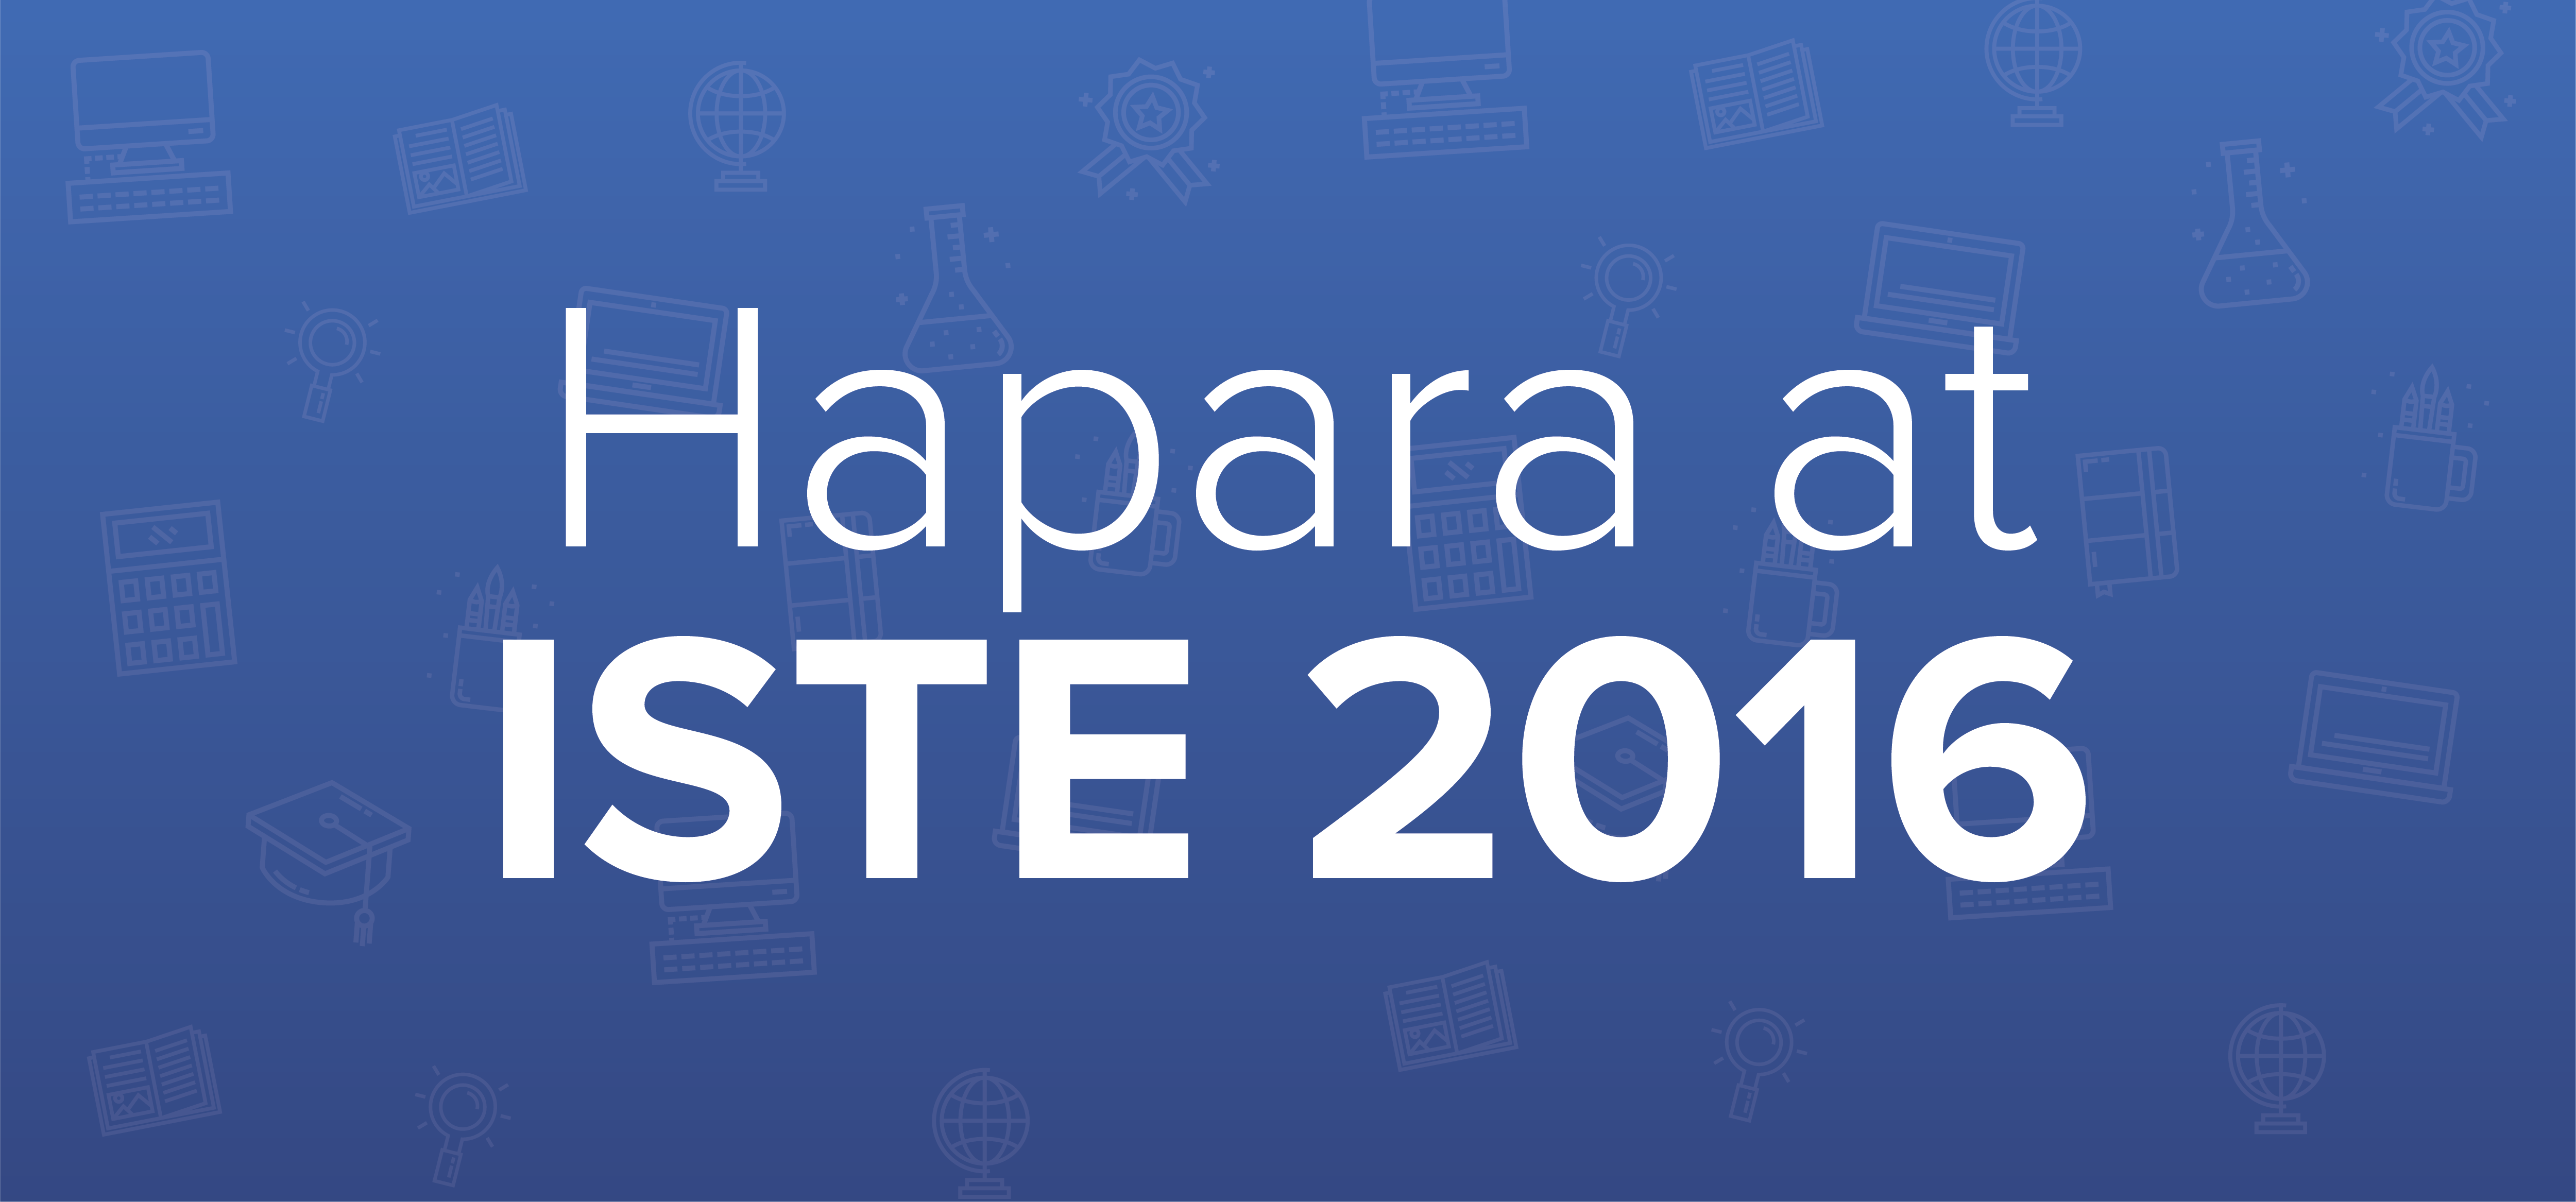 How To Make ISTE 2016 A Learning Adventure